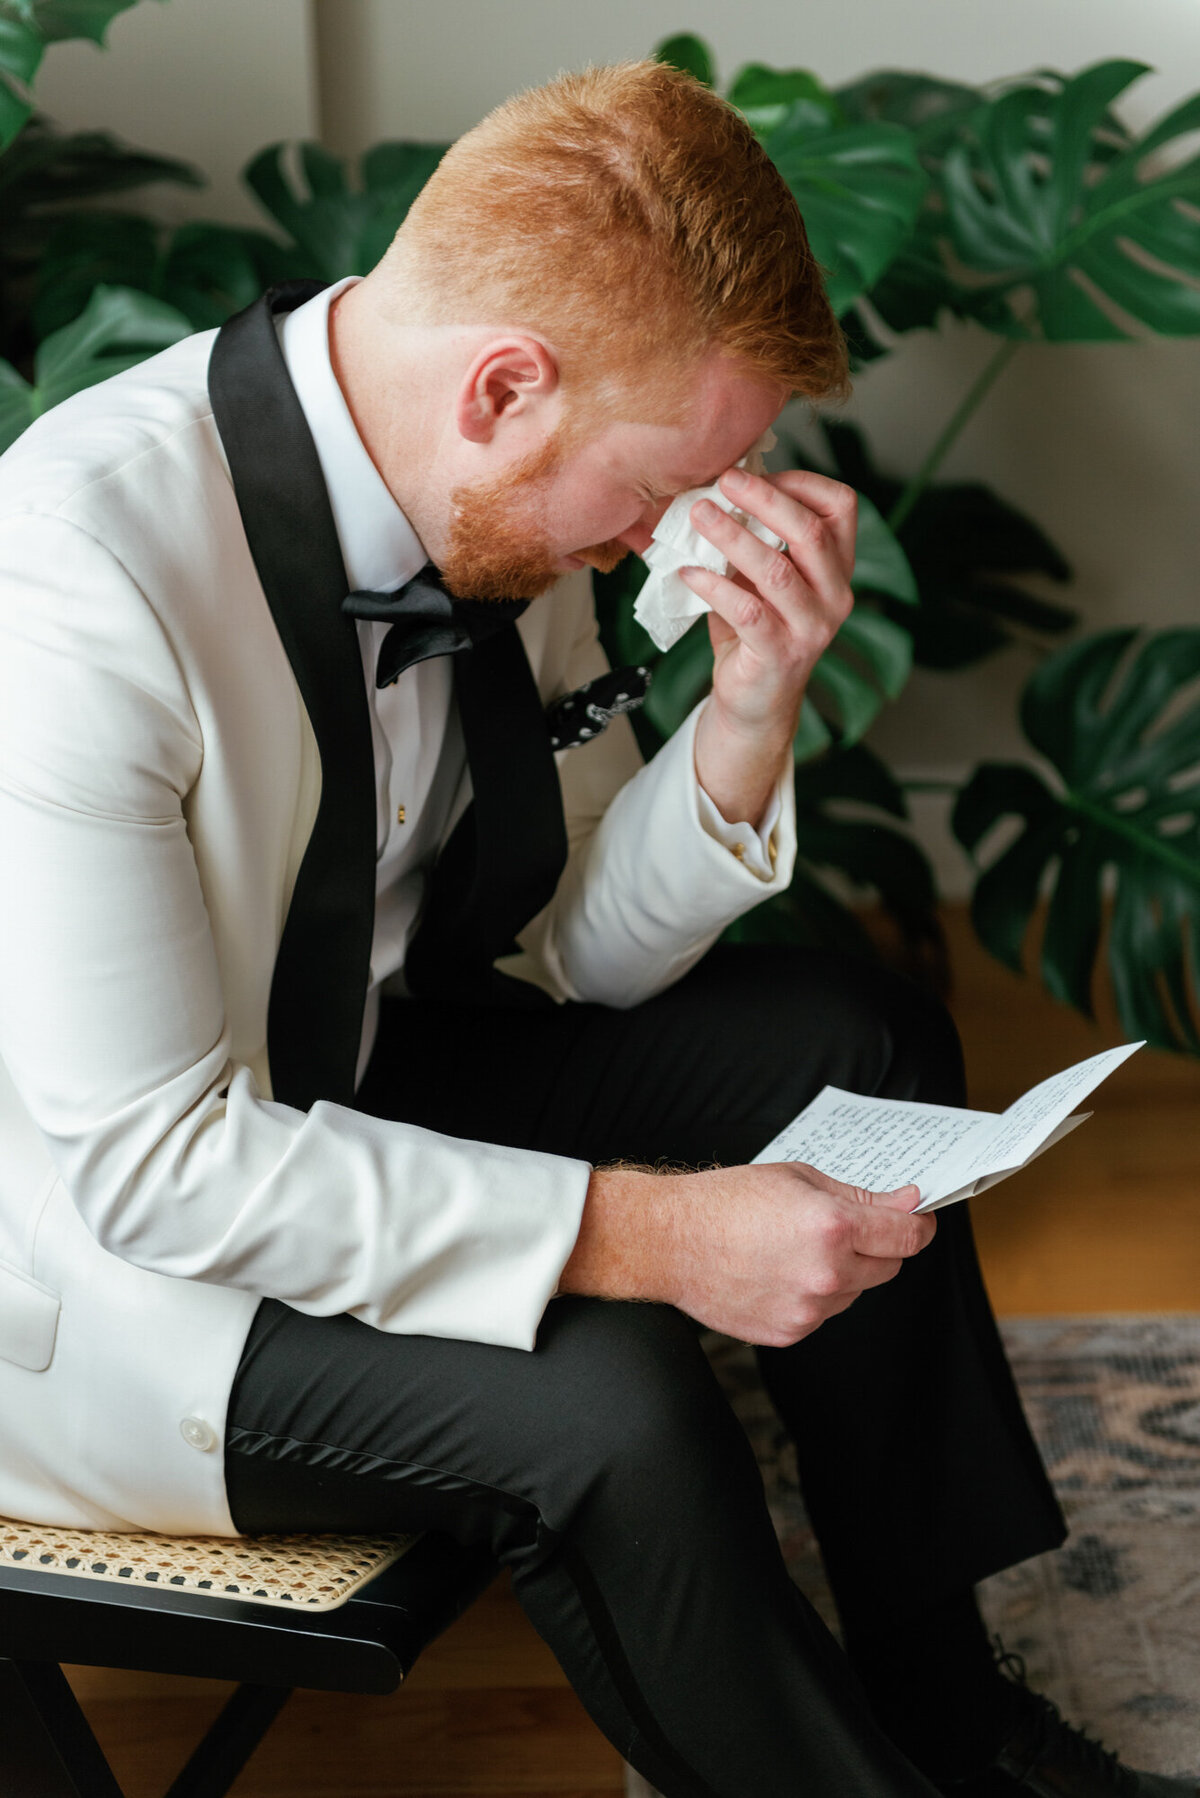 A groom cries as he reads a private note from his bride-to-be on their wedding day